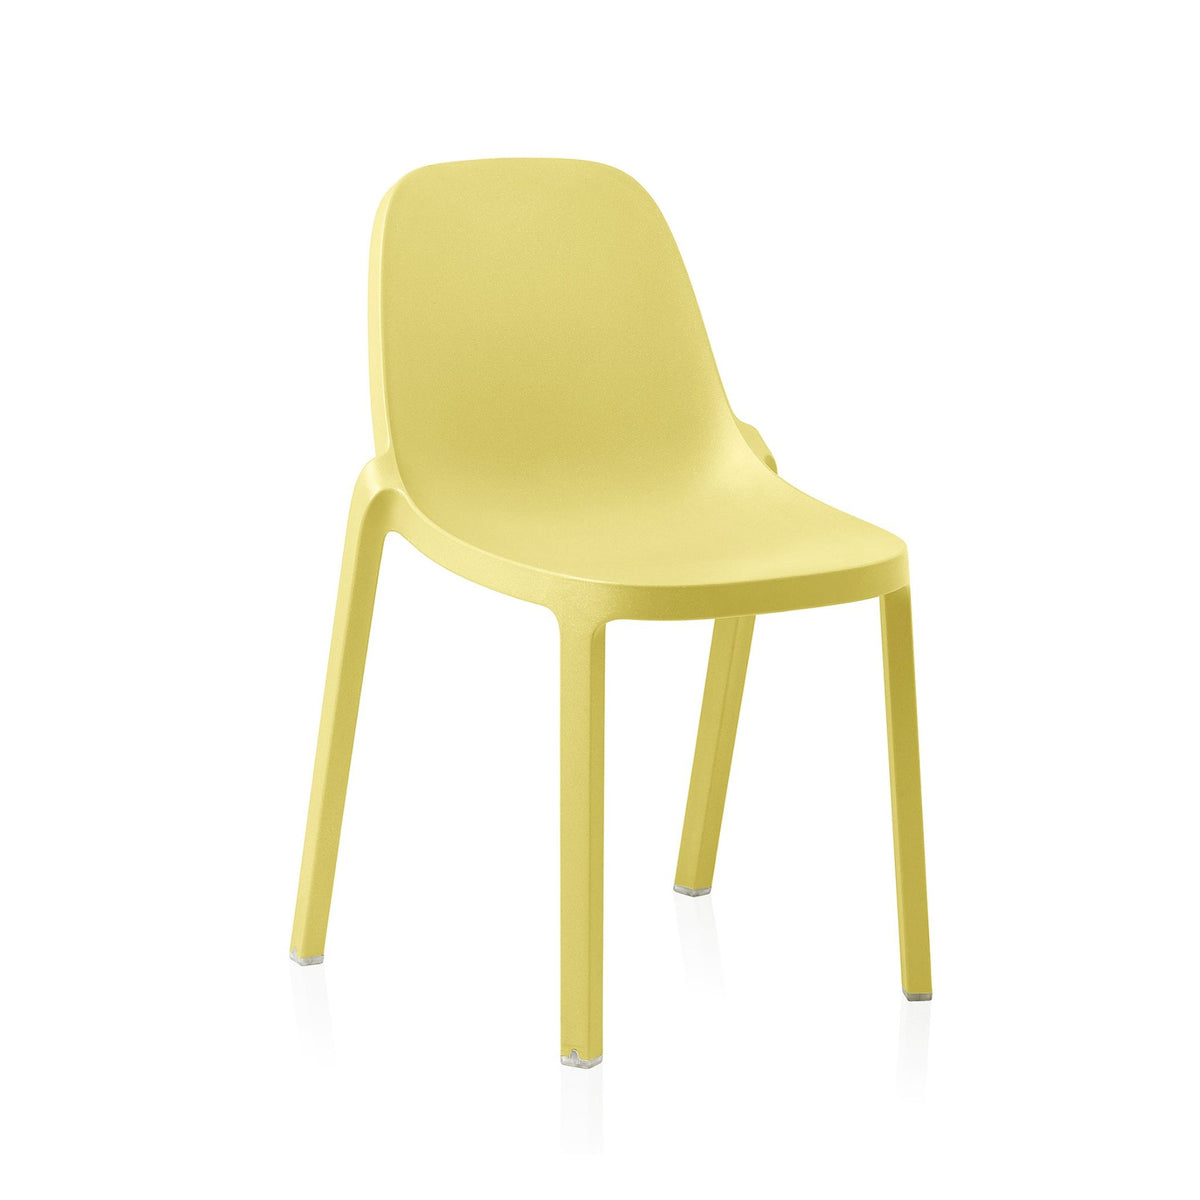 Emeco Broom Chair Butter Yellow